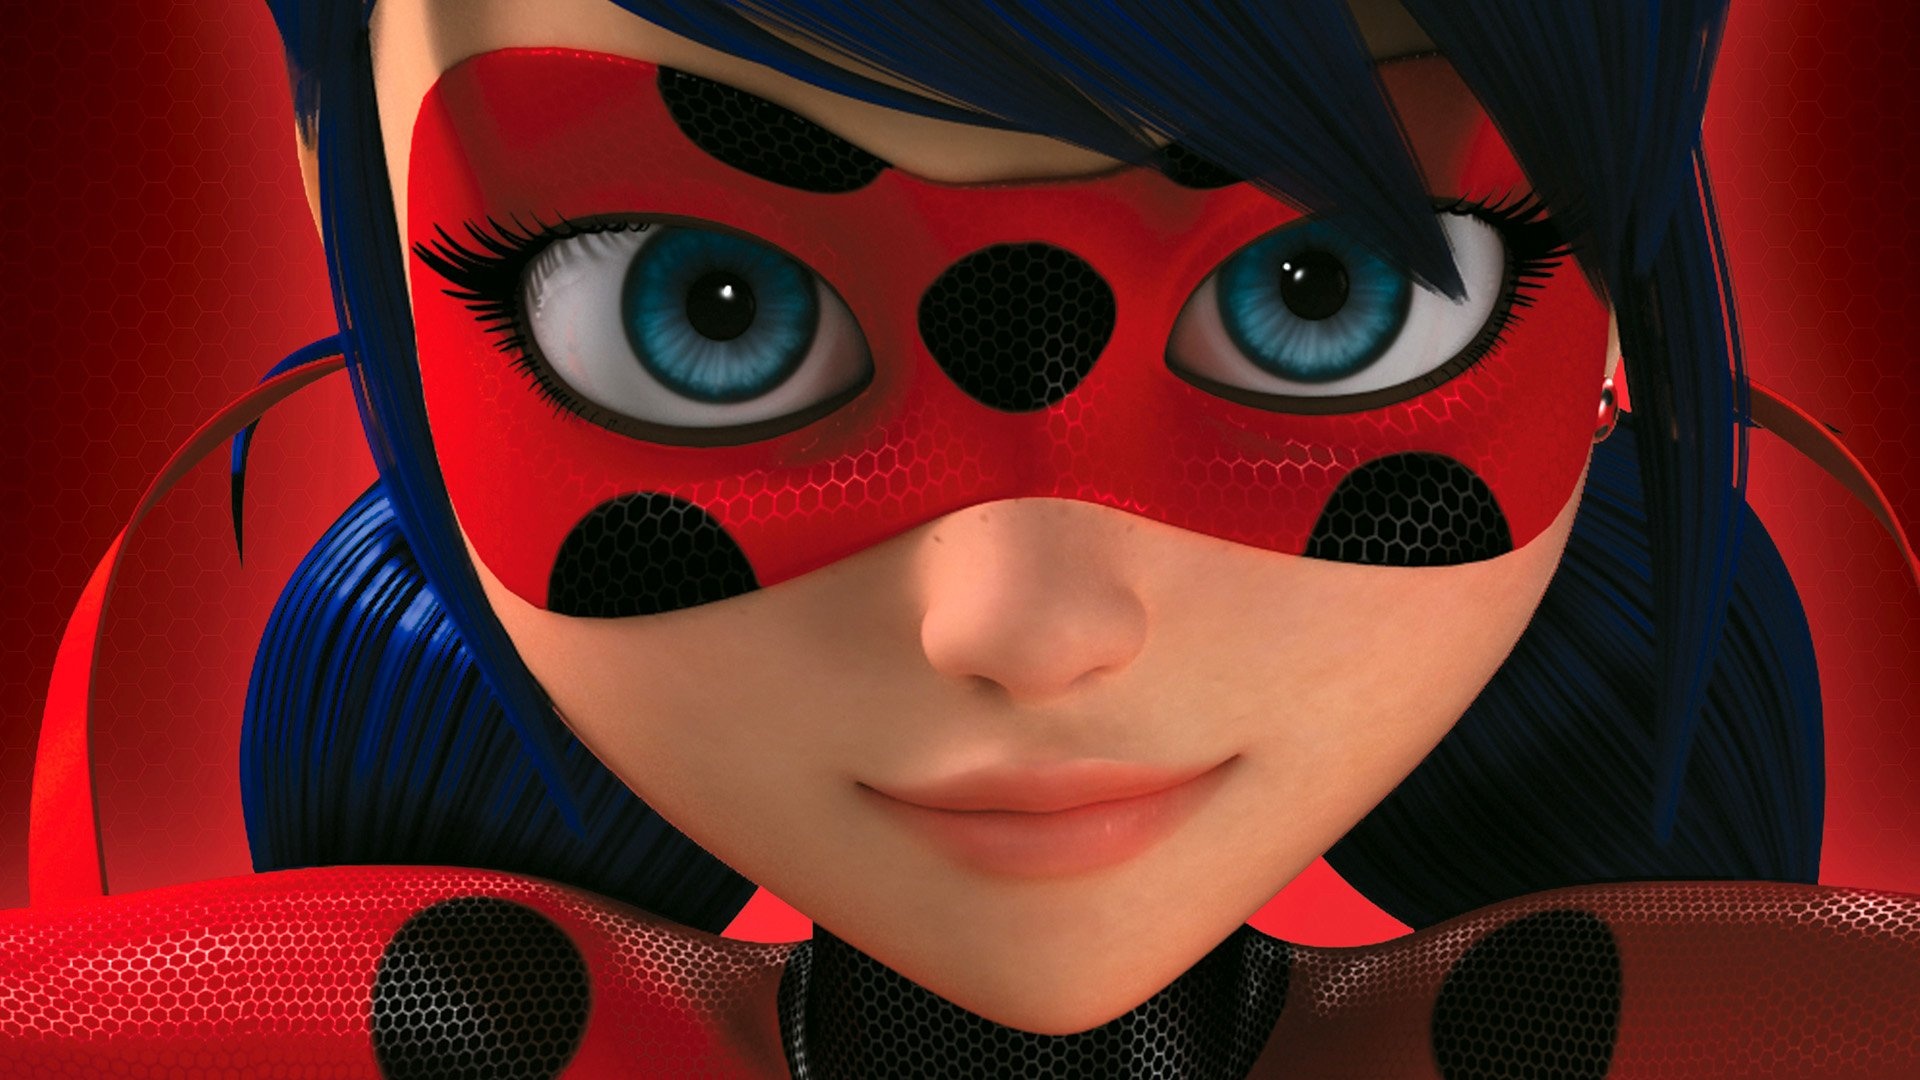 Miraculous Tales of Ladybug, Mobile wallpapers, Desktop backgrounds, Explore the collection, 1920x1080 Full HD Desktop